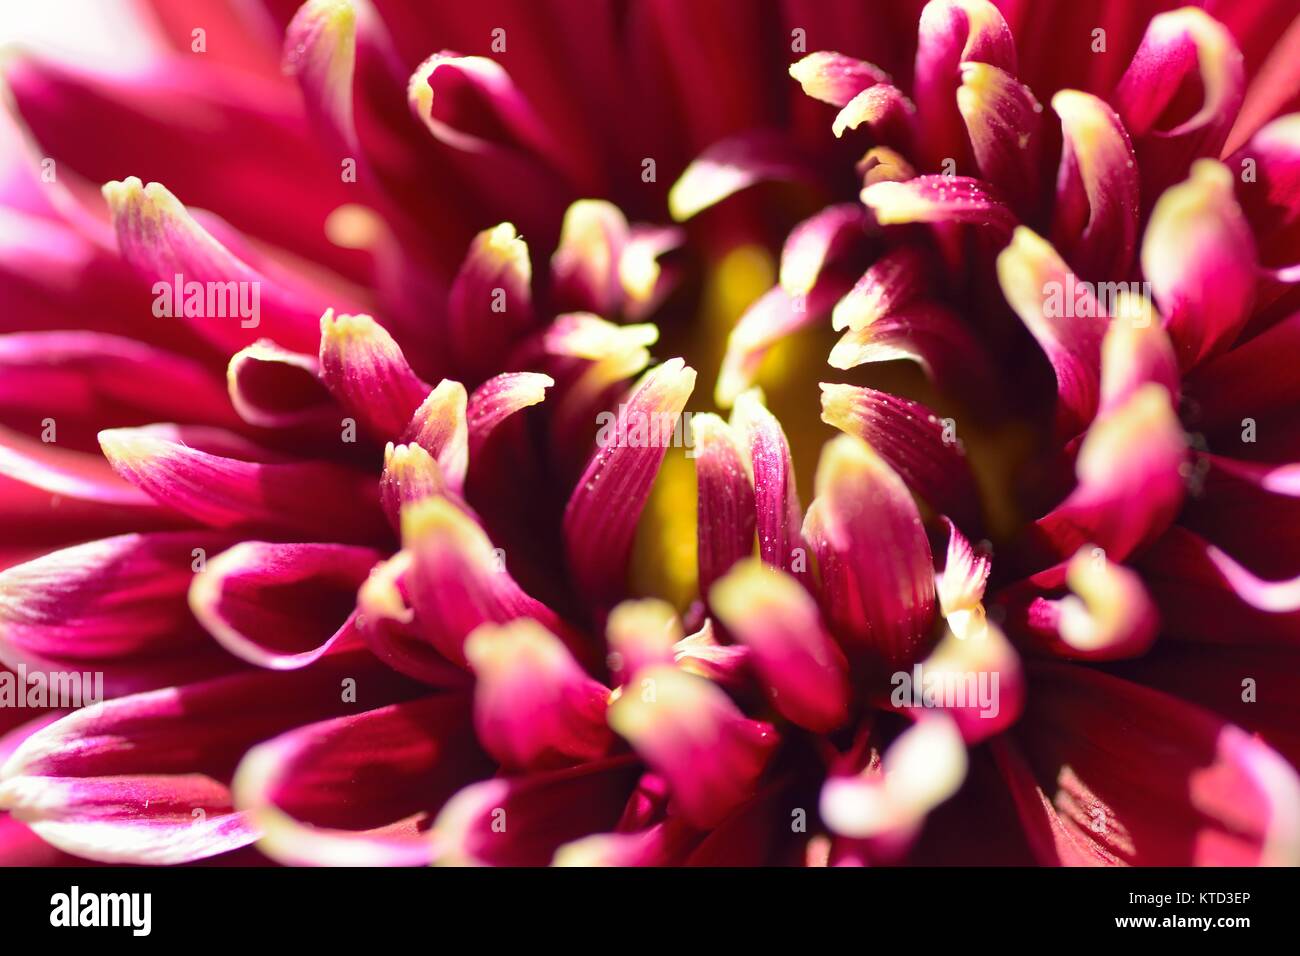 Macro texture of vibrant brown colored Dahlia flower petals in horizontal frame Stock Photo